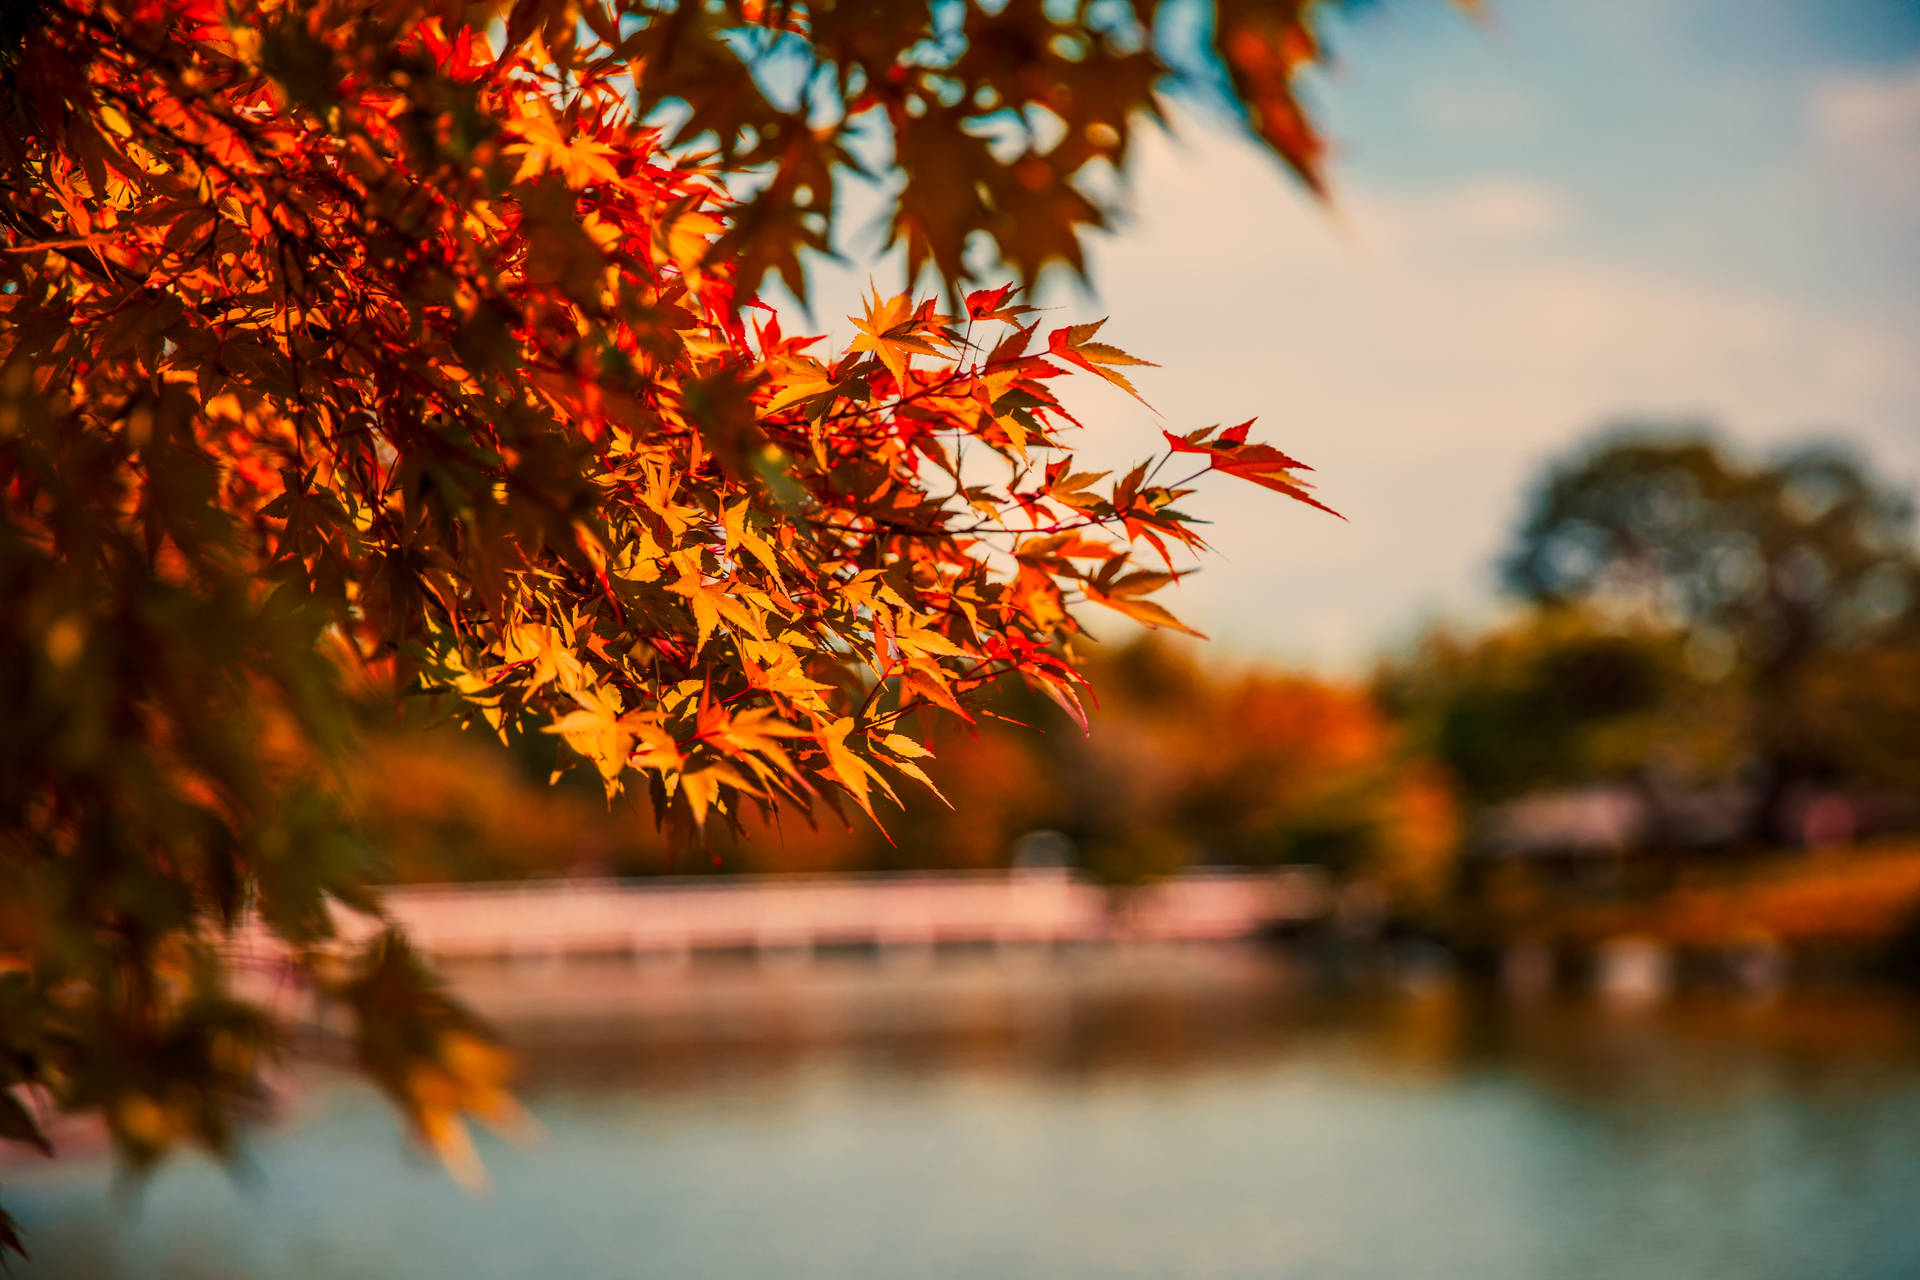 Autumn Maple Leaves Close-Up Wallpaper